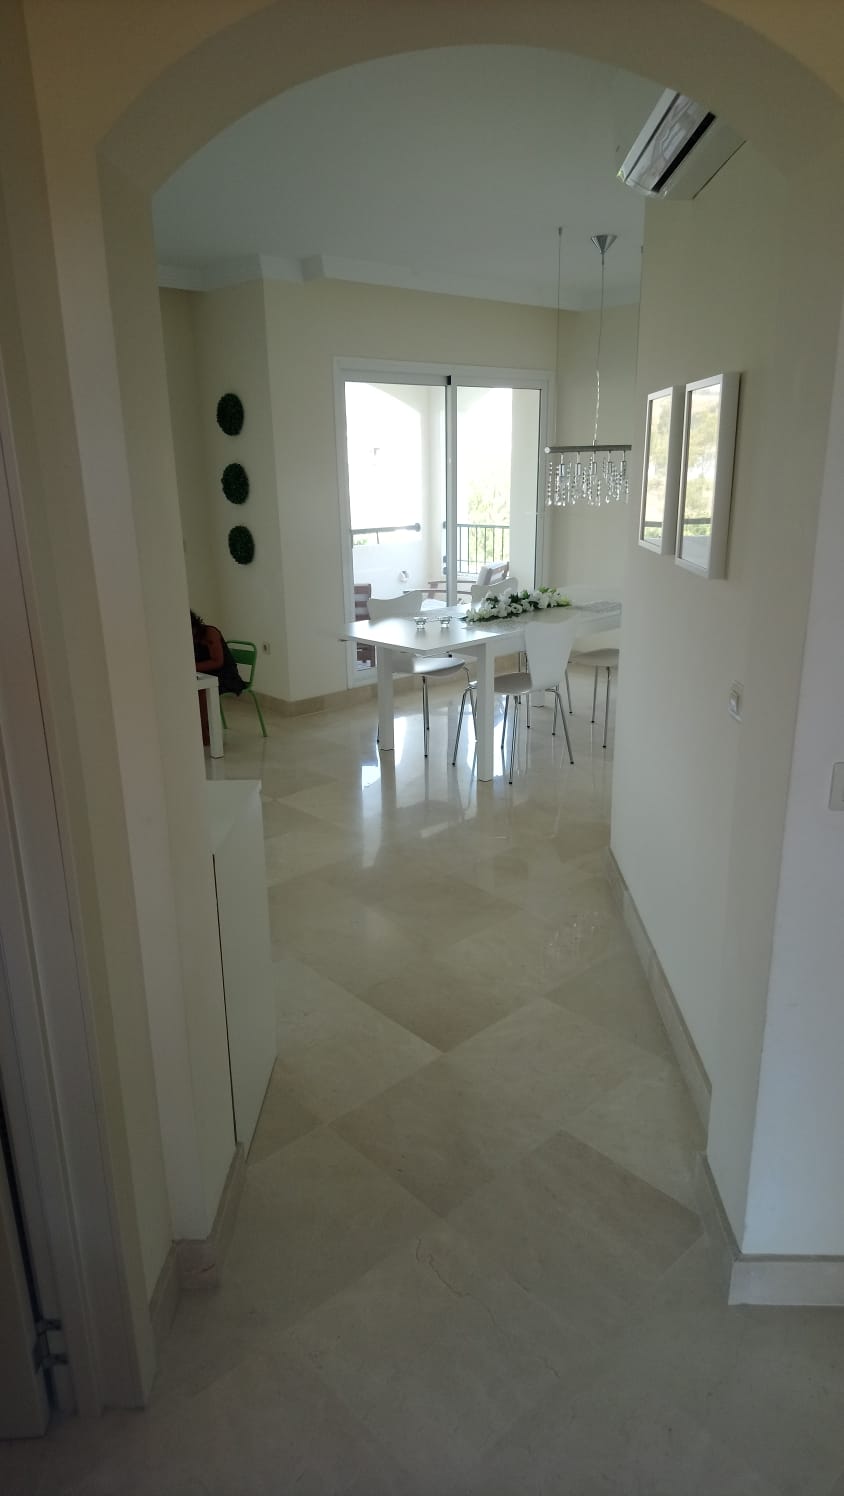 2 bedroom apartment for rent near Selwo park in Estepona - thumb - mibgroup.es